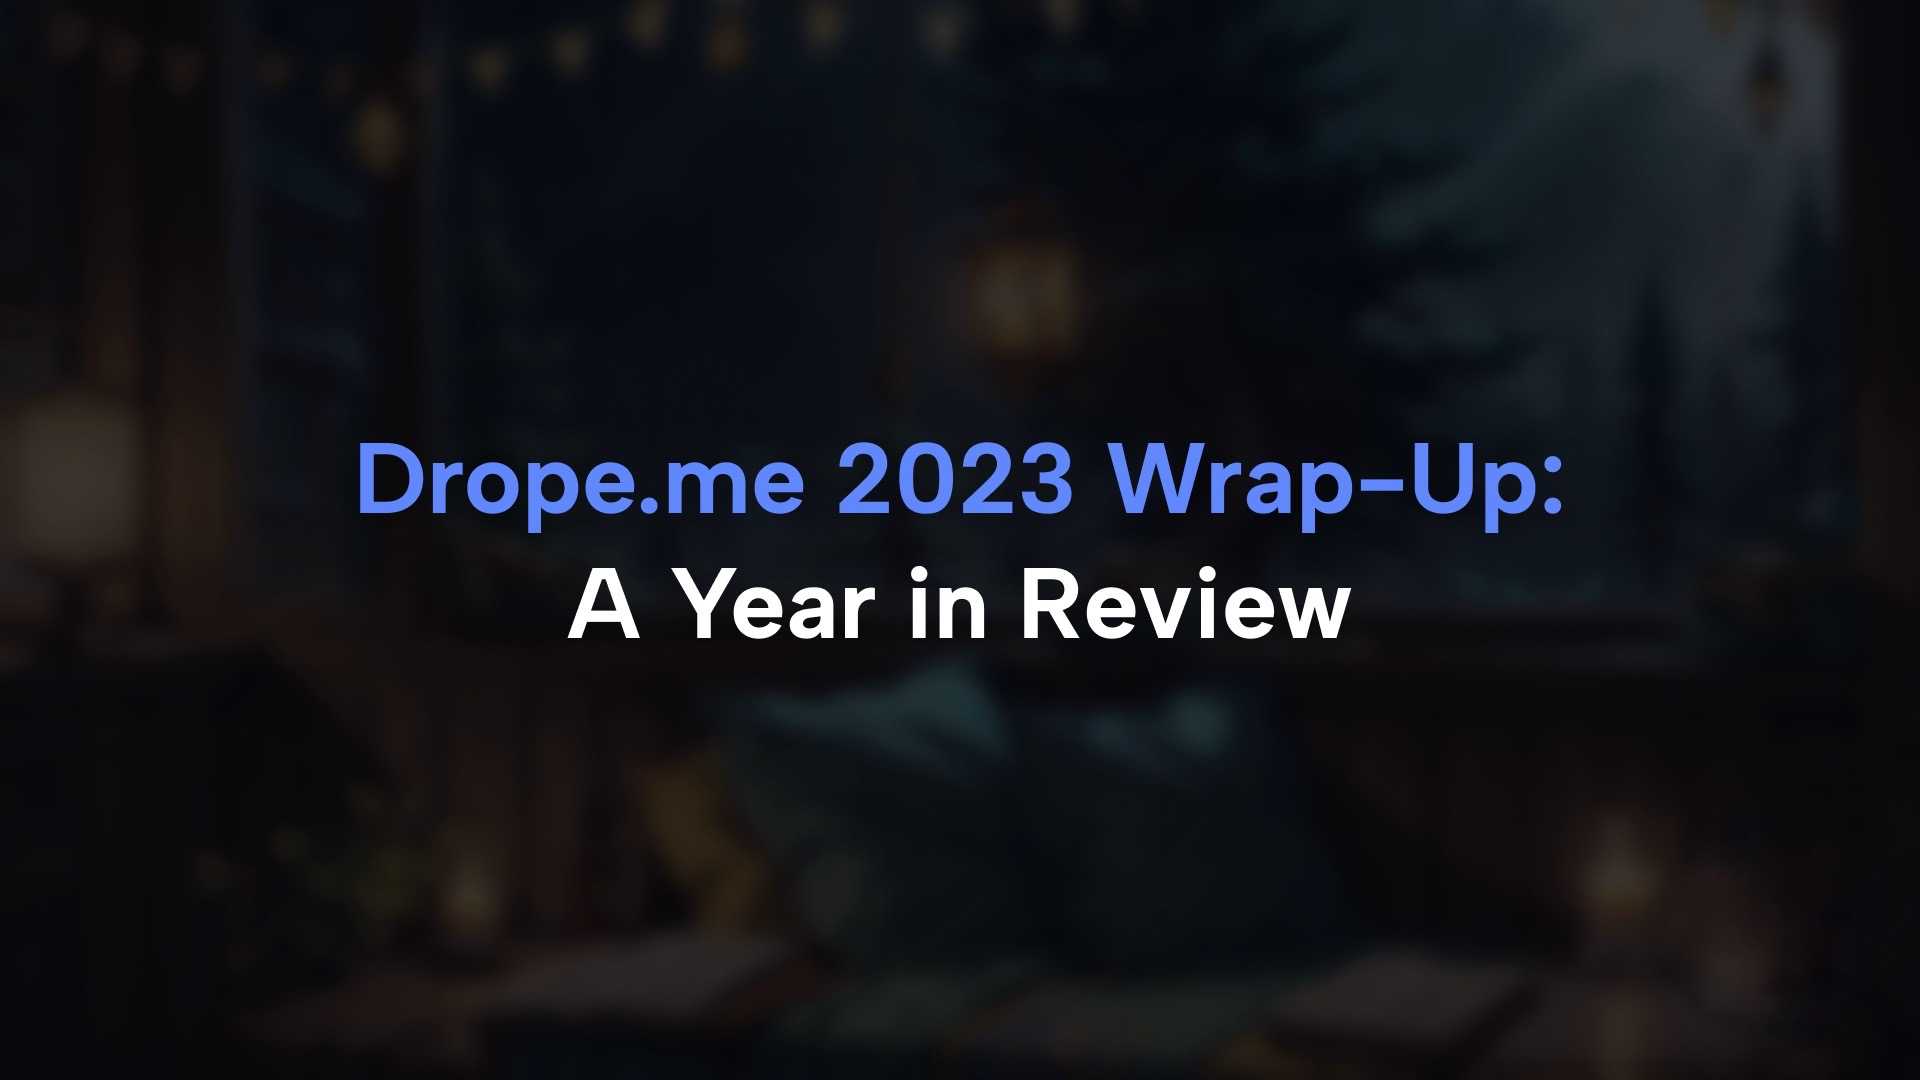 Drope.me 2023 Wrap-Up: A Year in Review